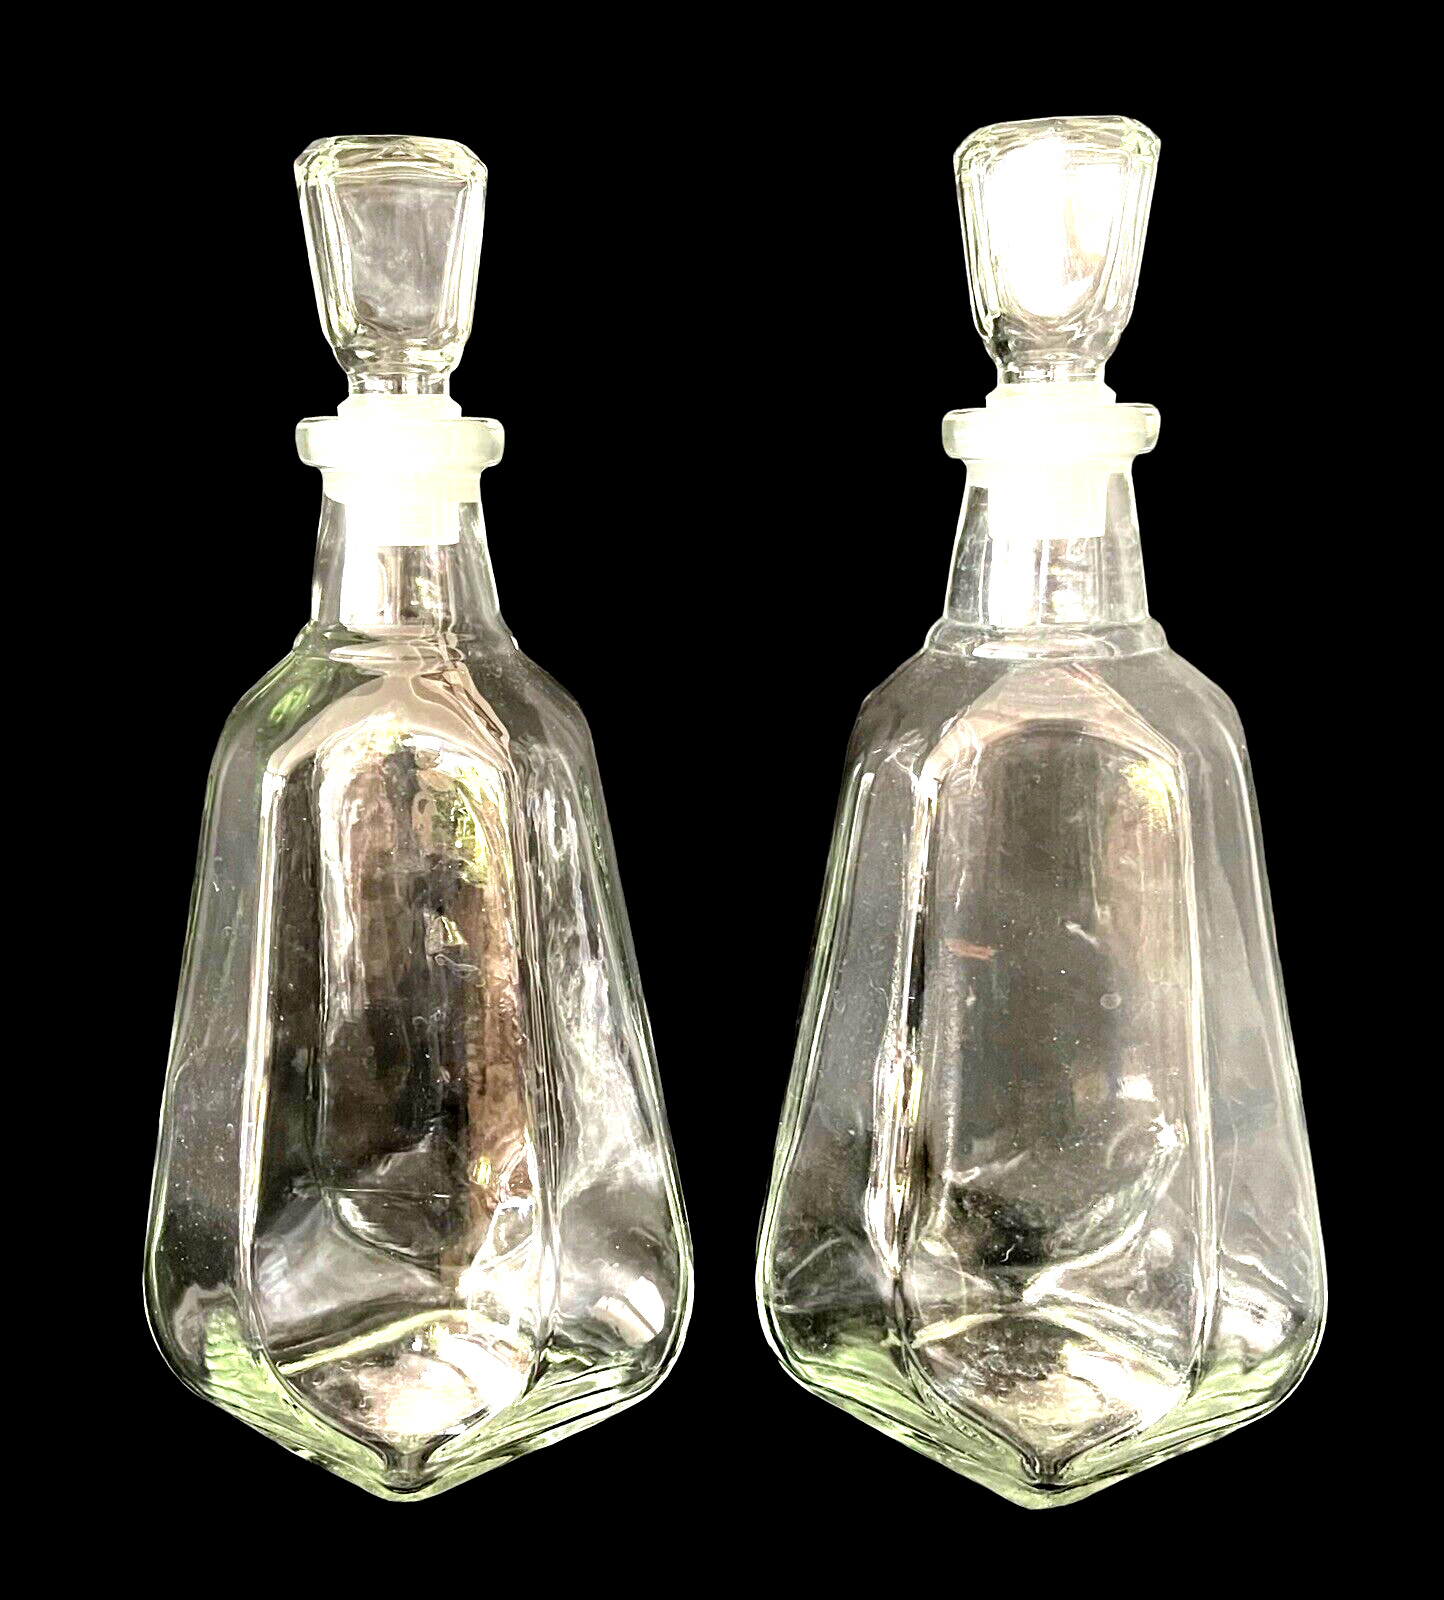 2 Crystal Liquor Bottle DECANTERS Unique Heavy Glass Decanters w/Stoppers 750 mL